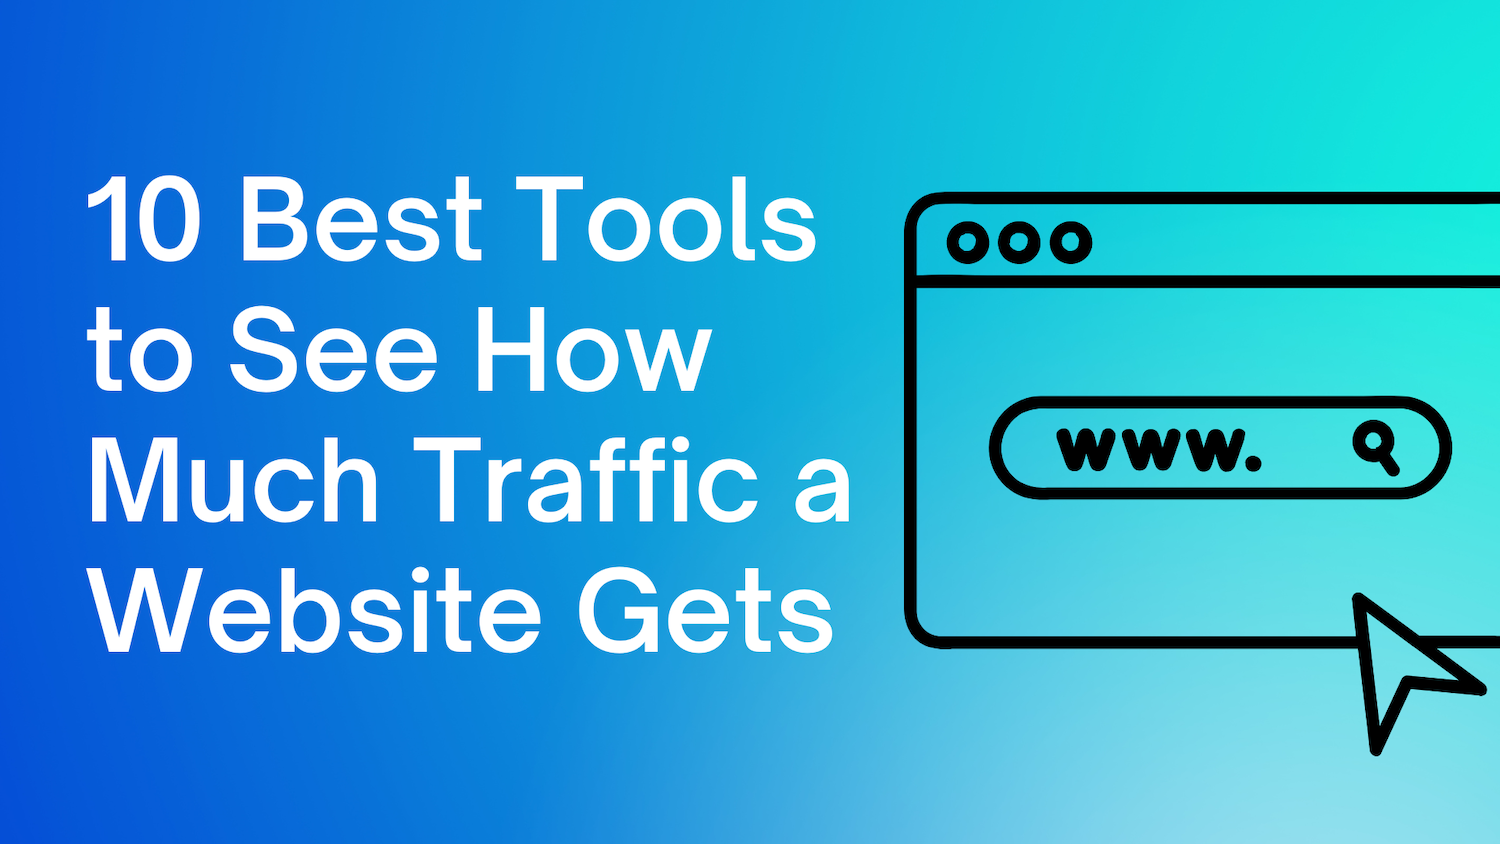 See how much traffic a website gets